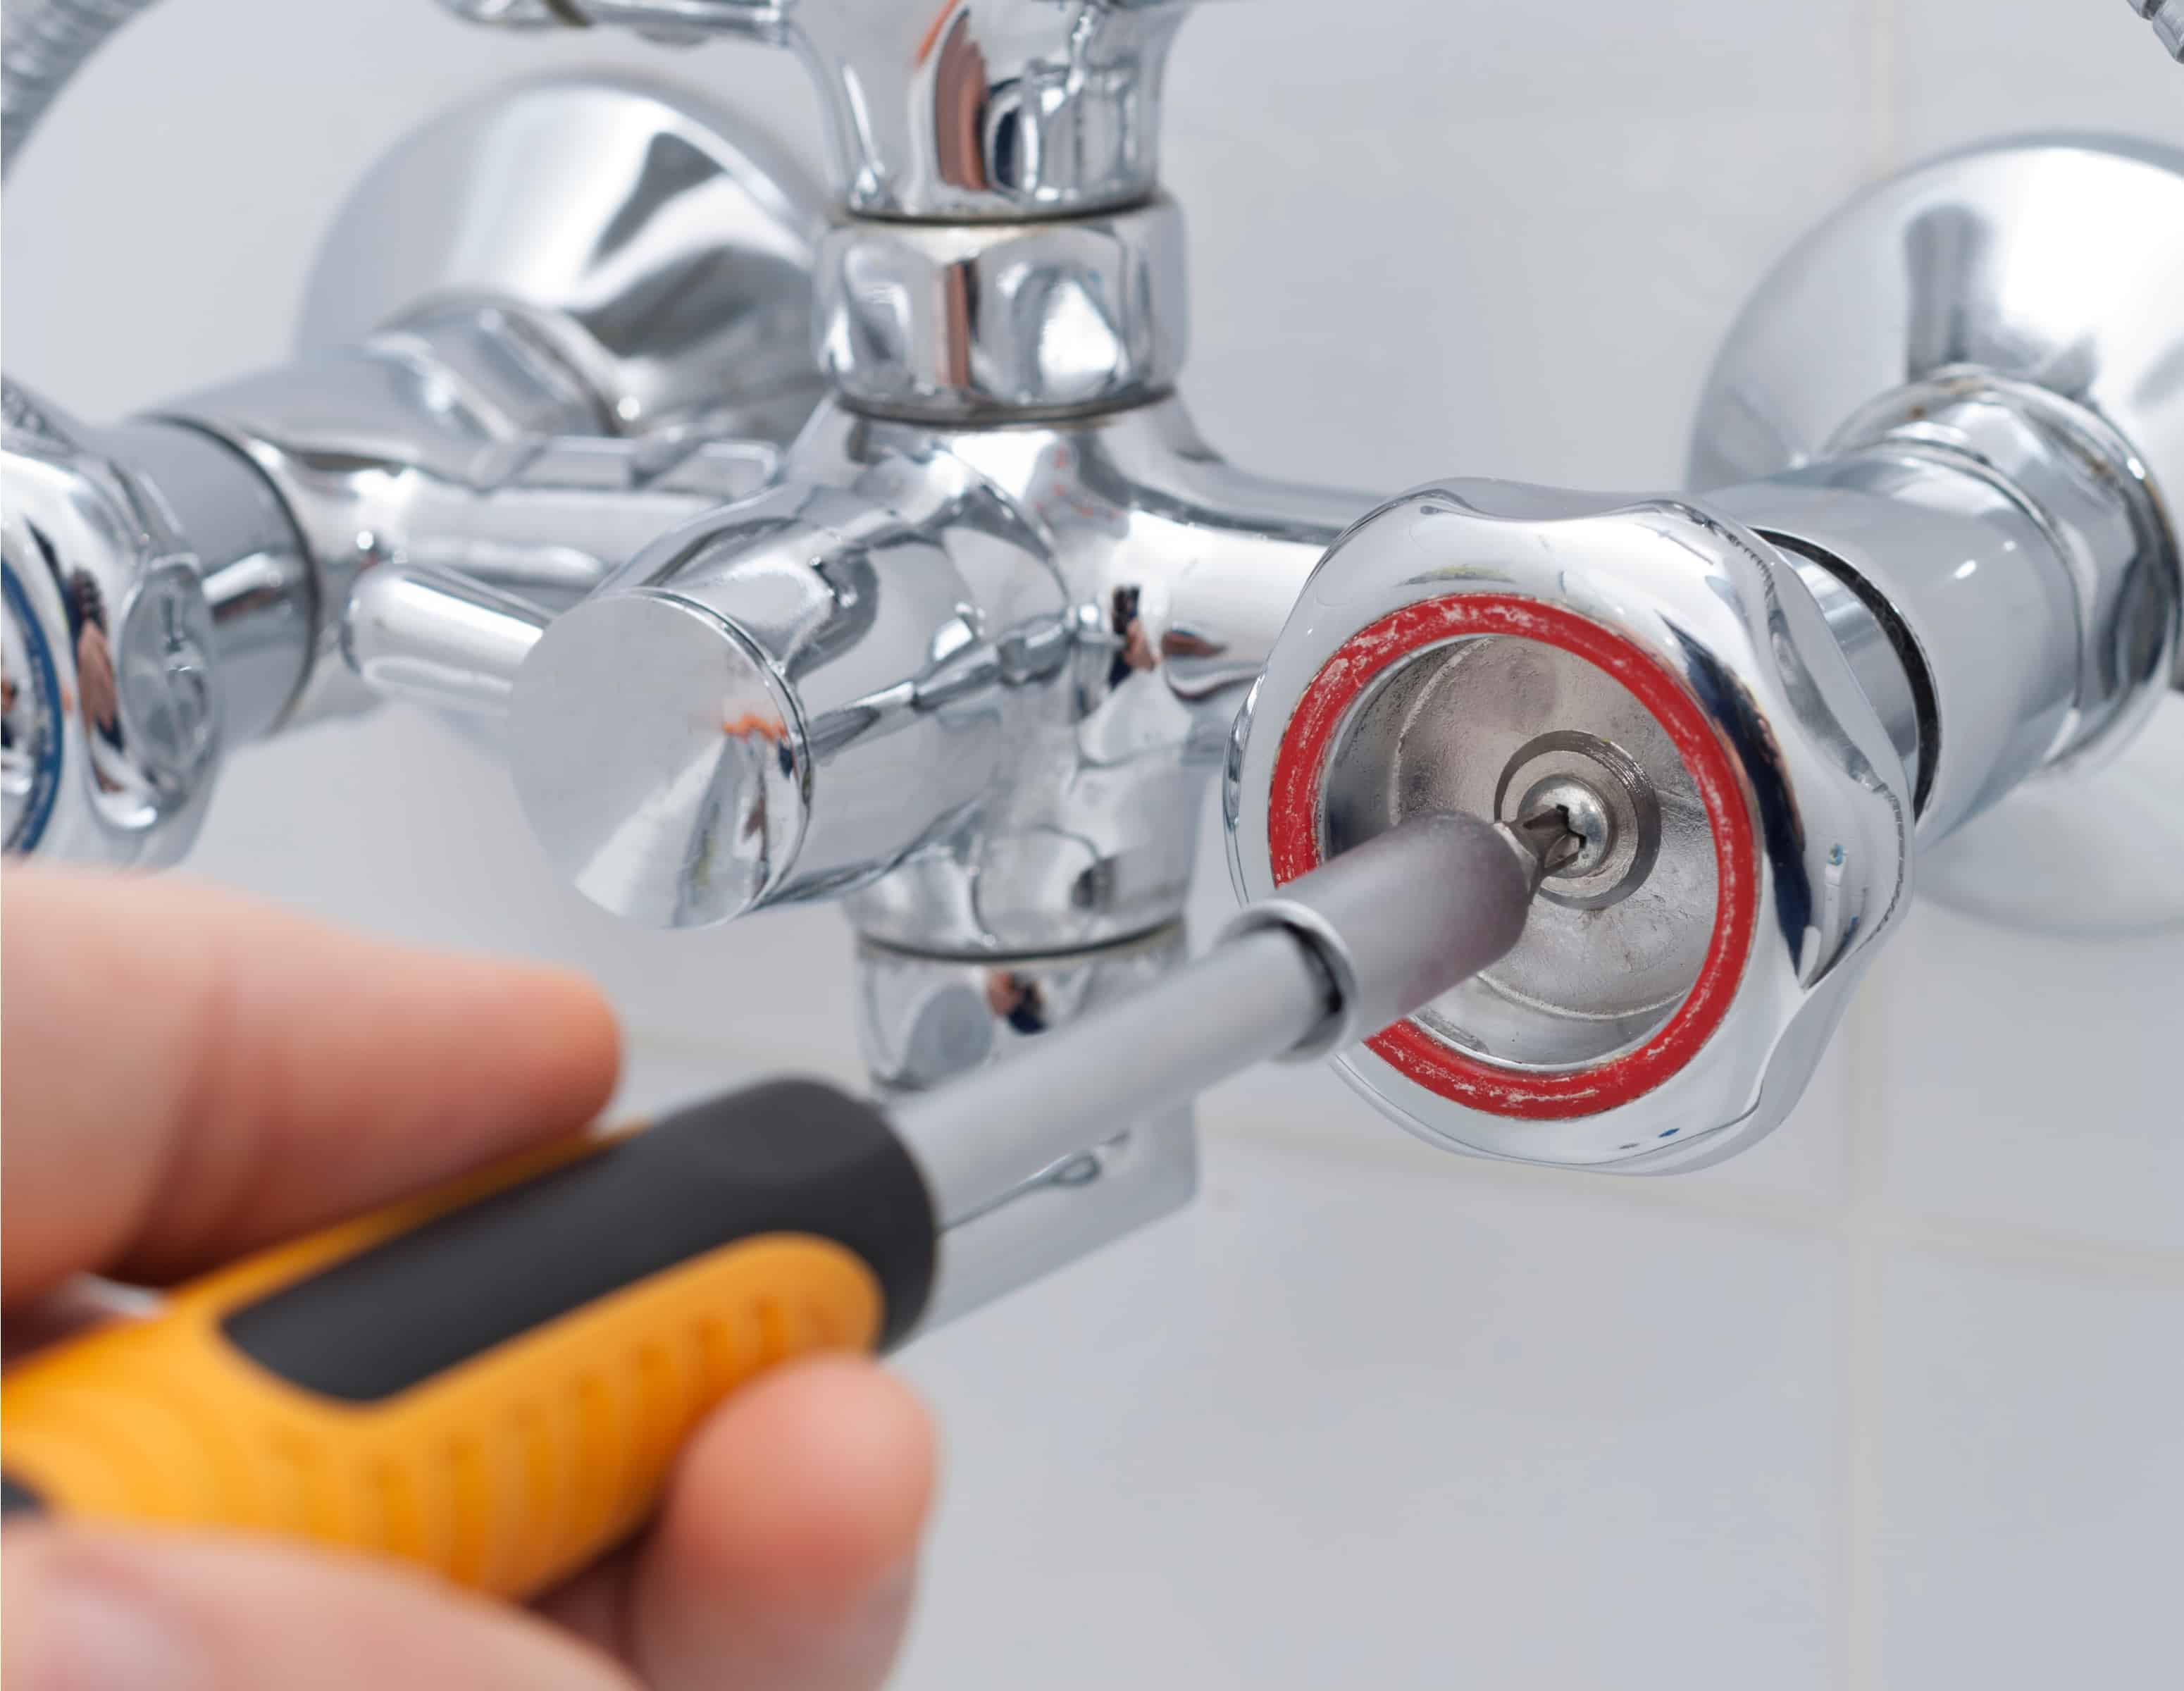 24 Easy Steps To Fix a Leaky Shower Faucet